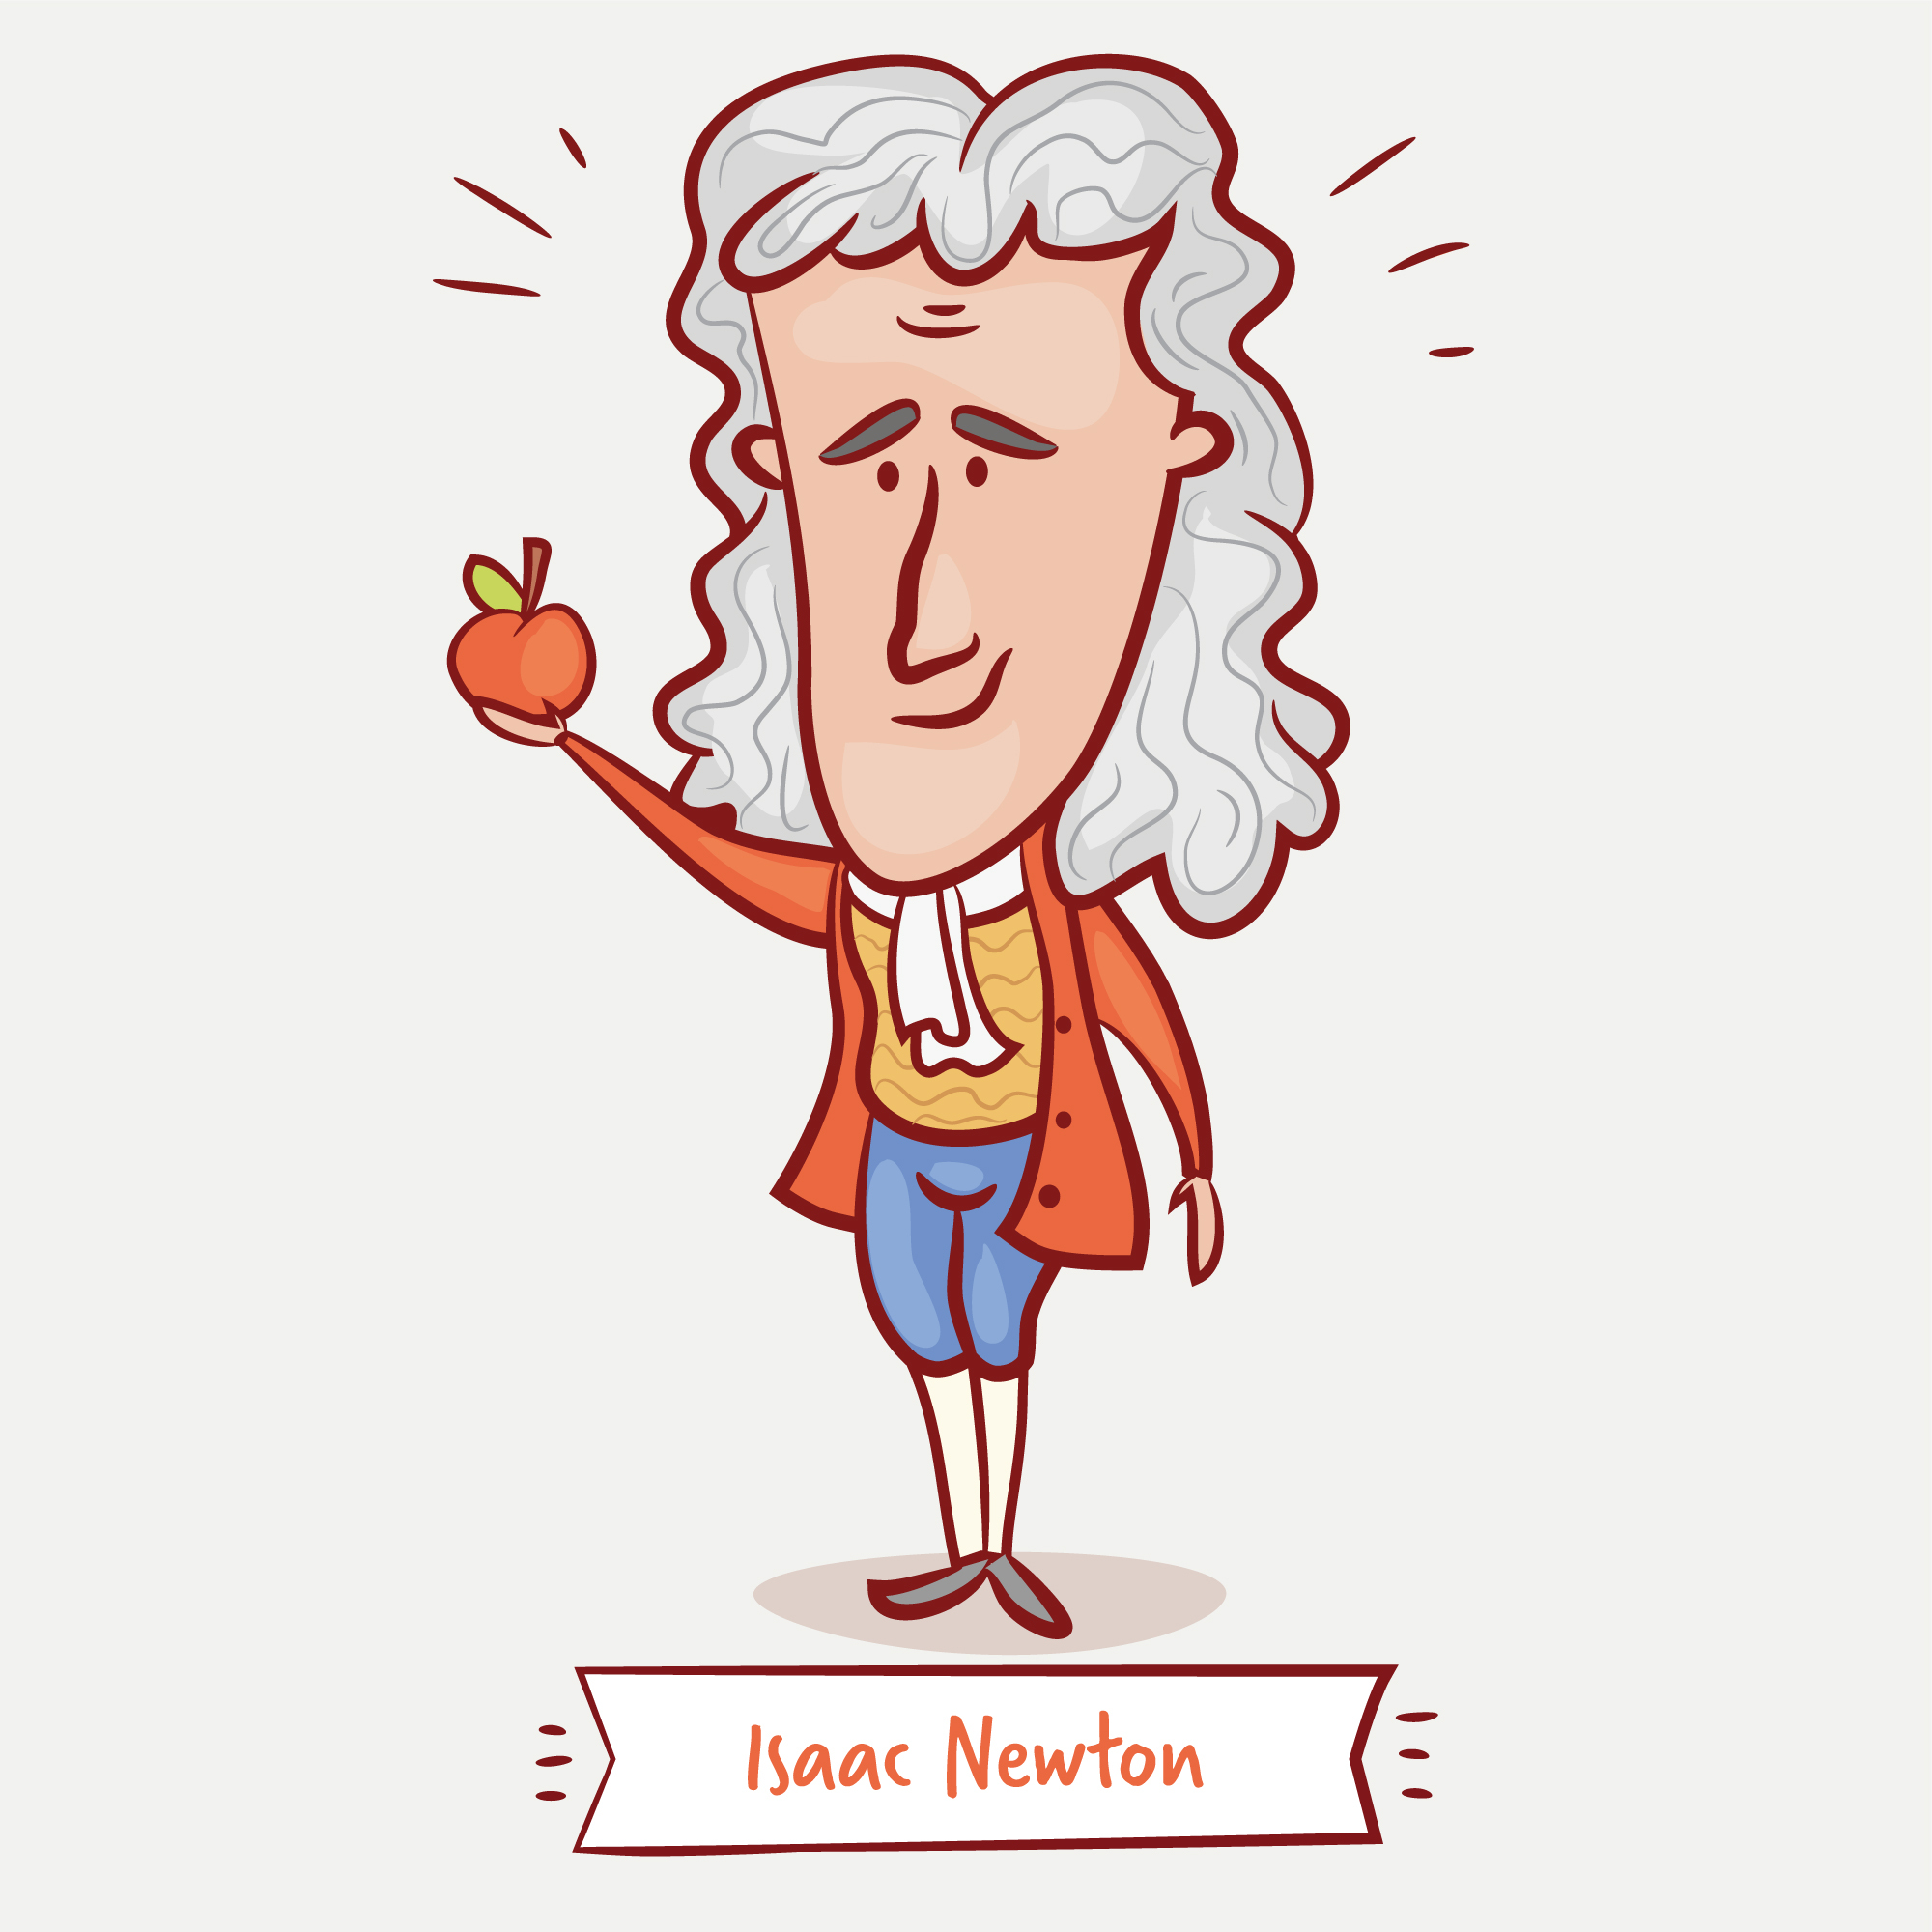 The,Scientist,Physicist,Isaac,Newton,With,An,Apple,In,A